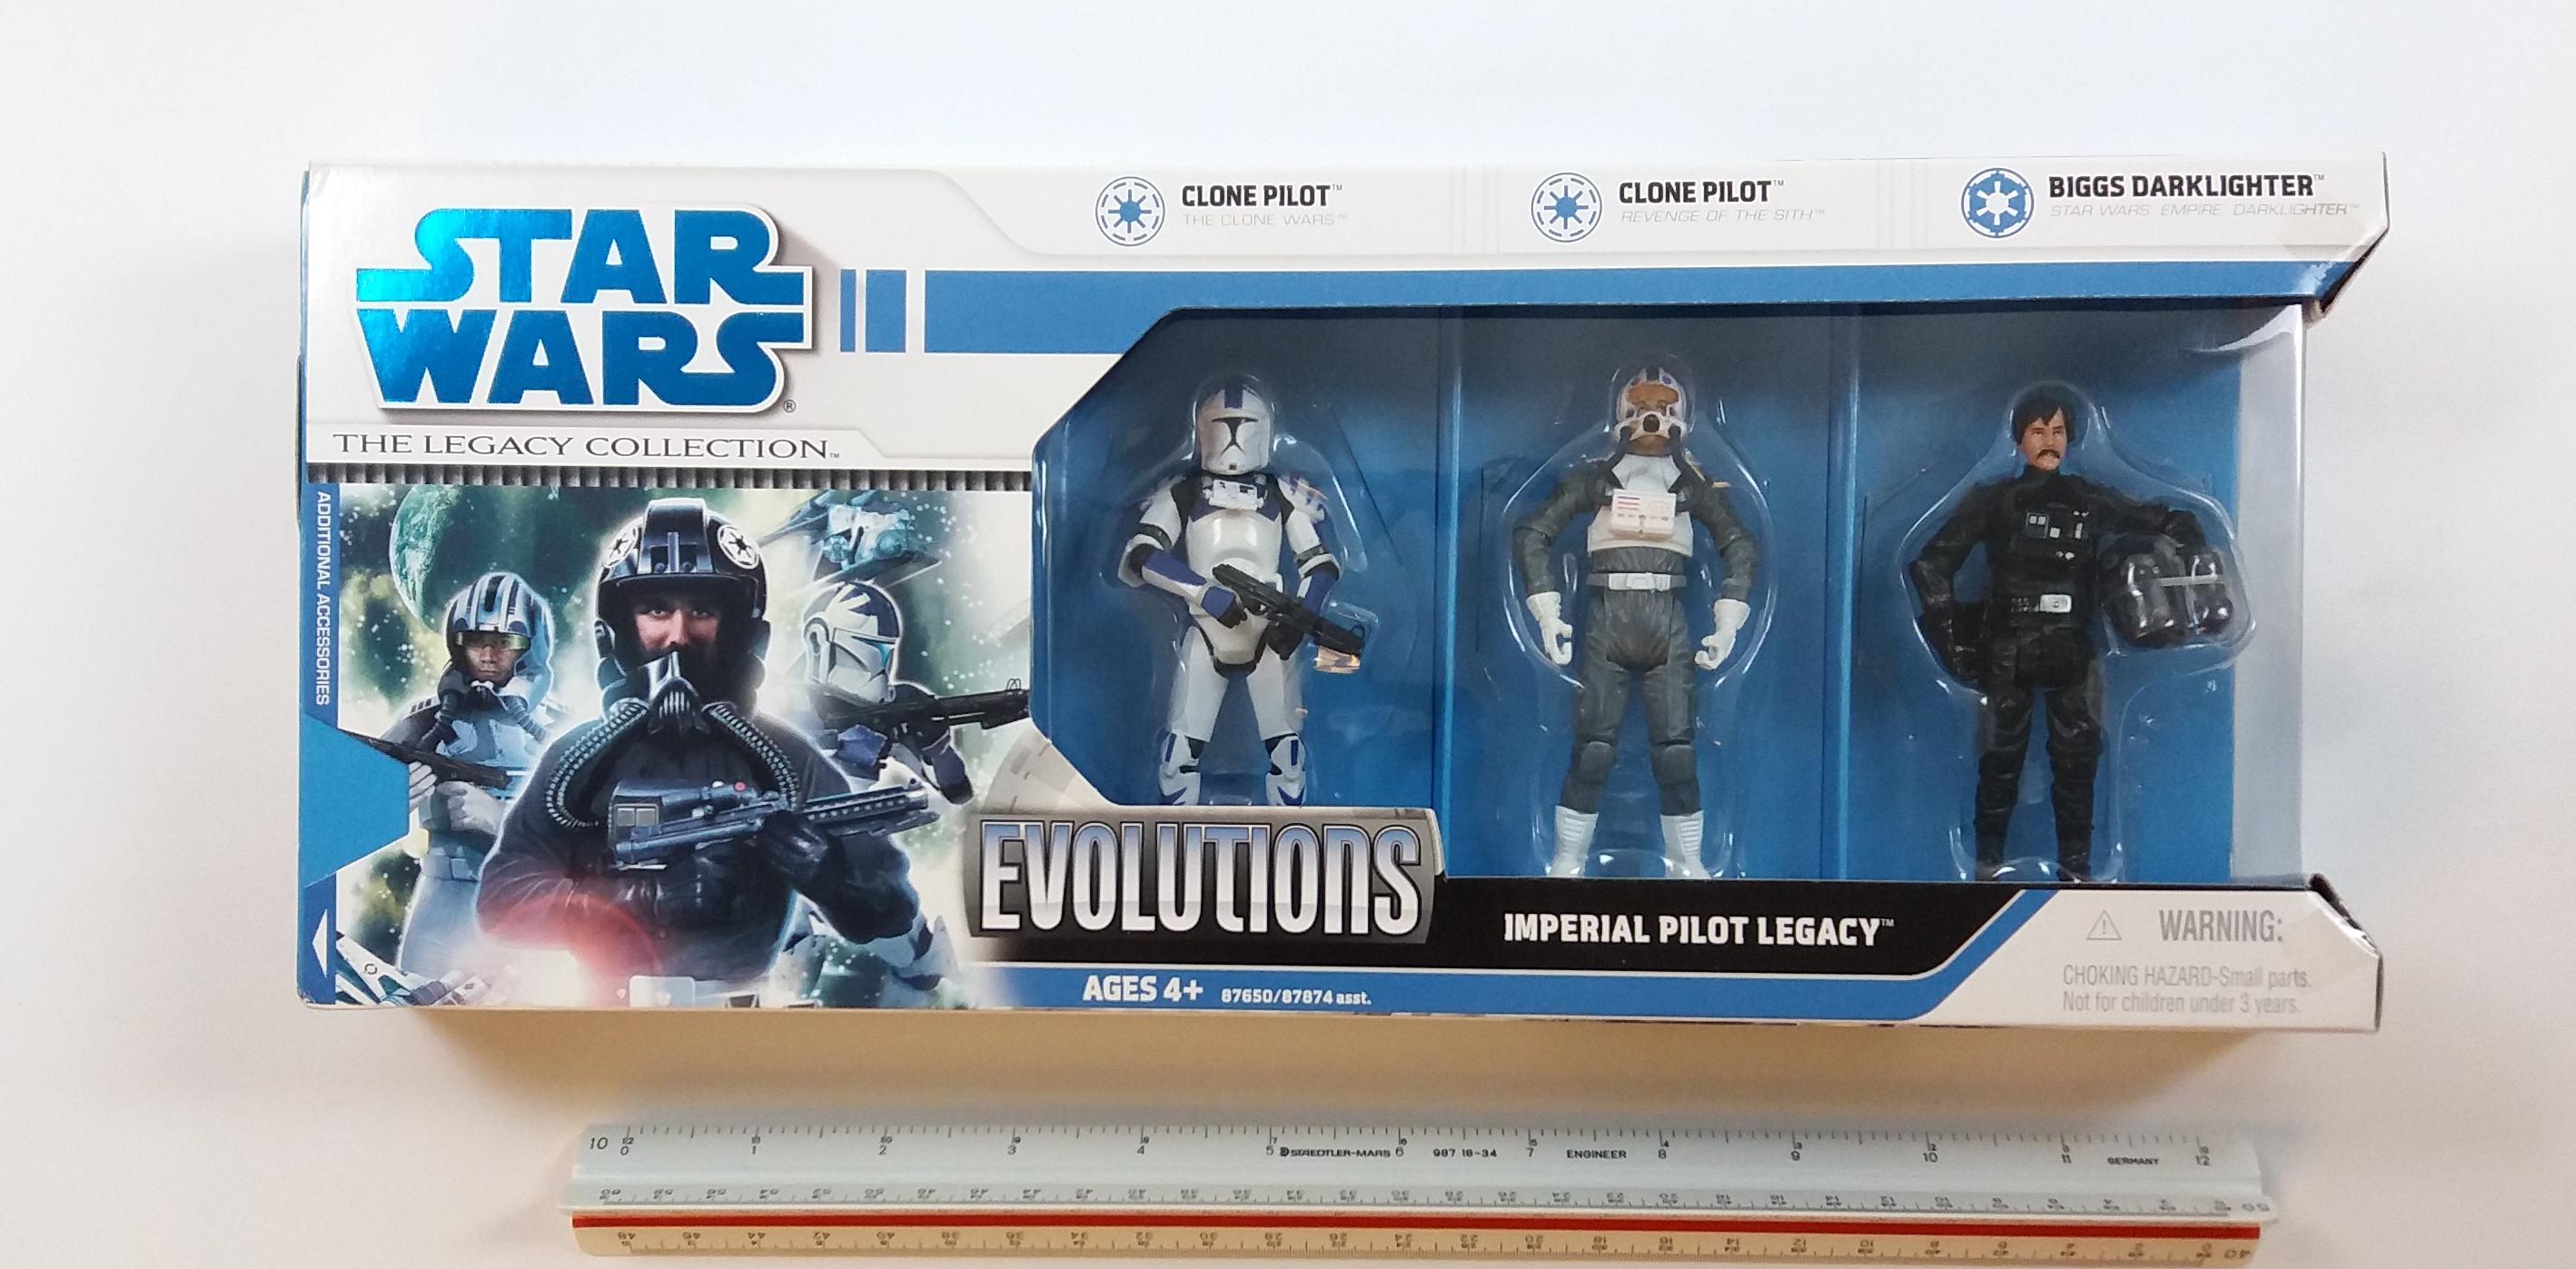 Imperial Pilot Legacy Star Wars Legacy Collection Evolutions 3 Figure Set